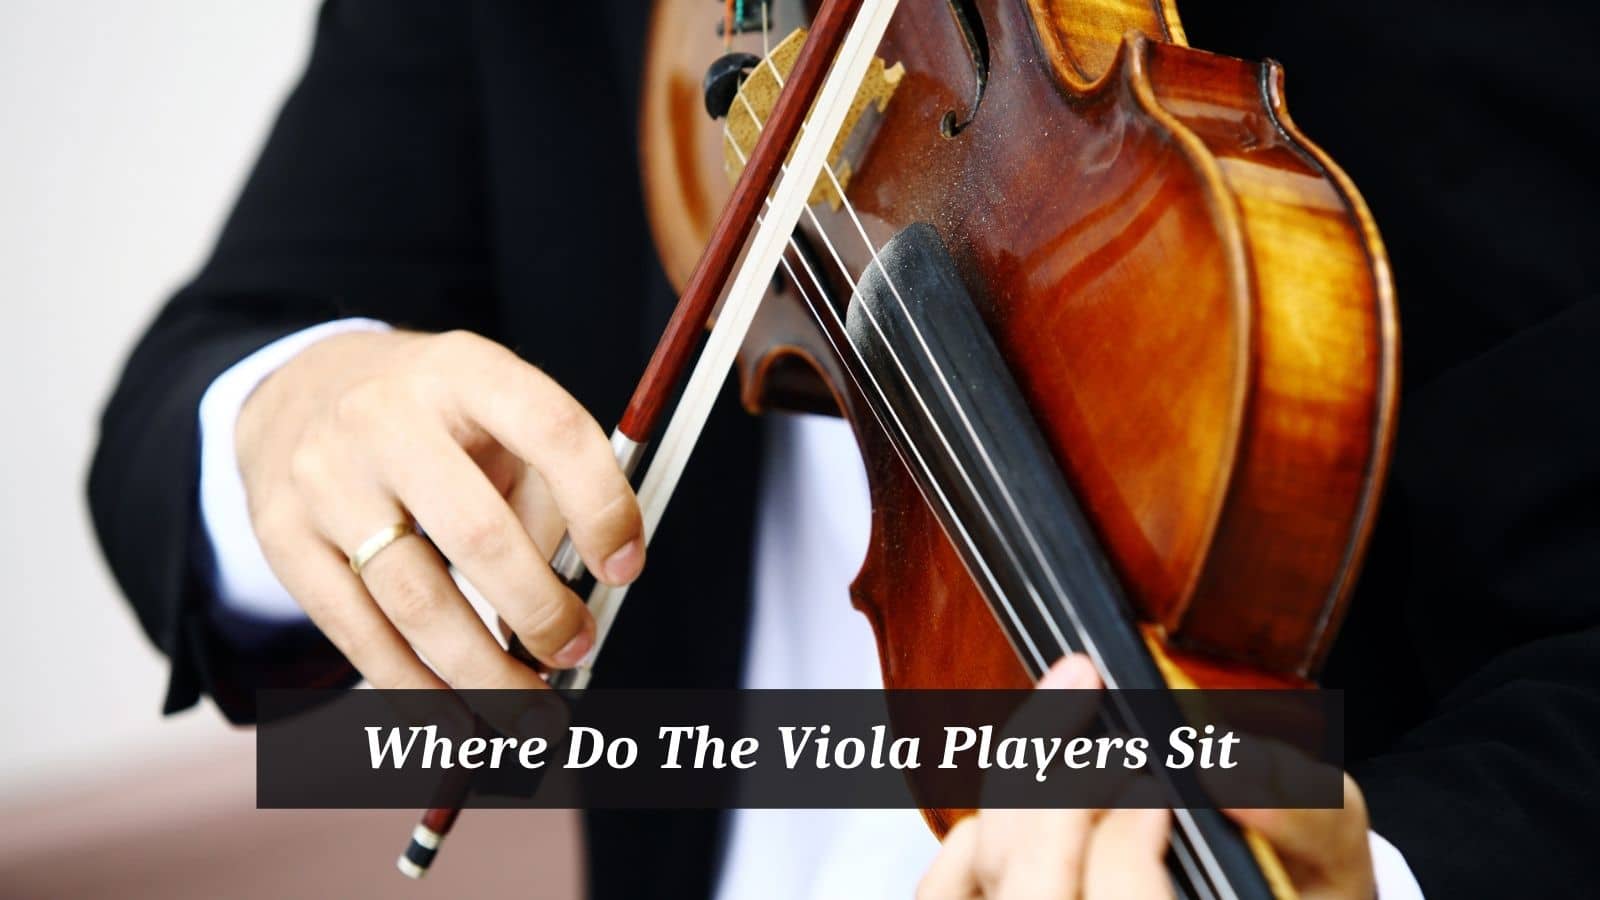 Where Do The Viola Players Sit